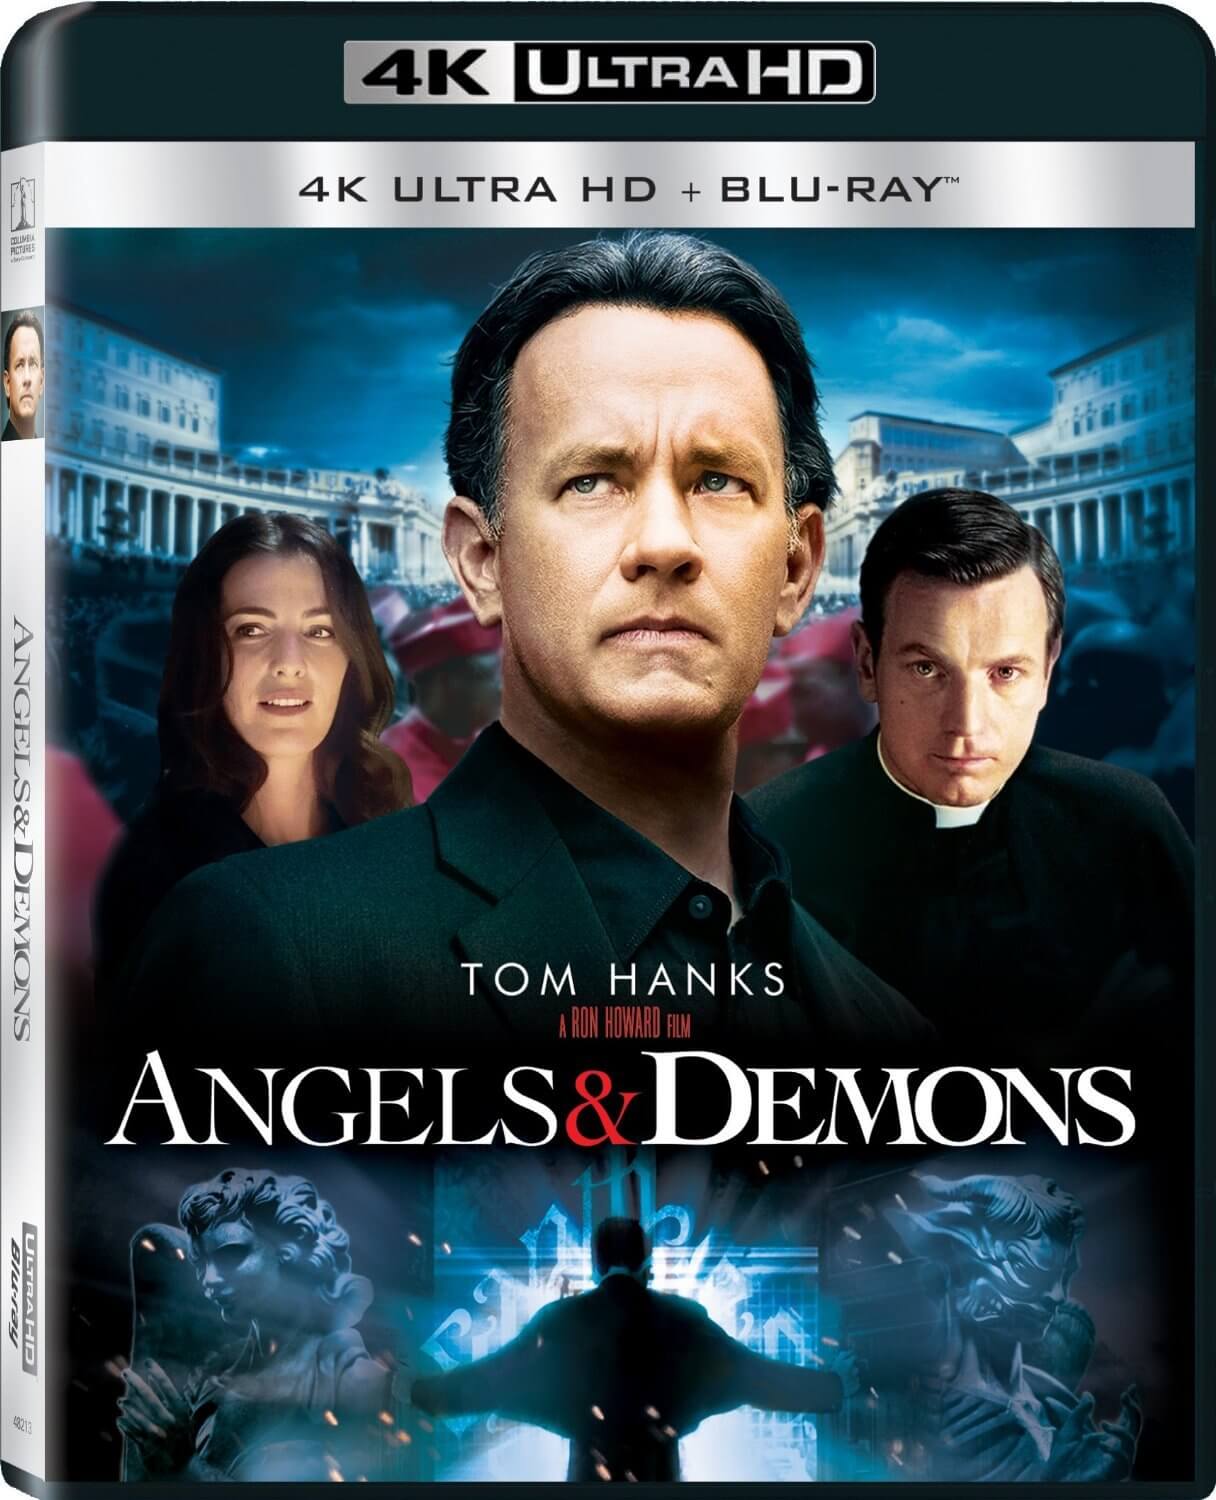 Angels and Demons 4K 2009 Ultra HD